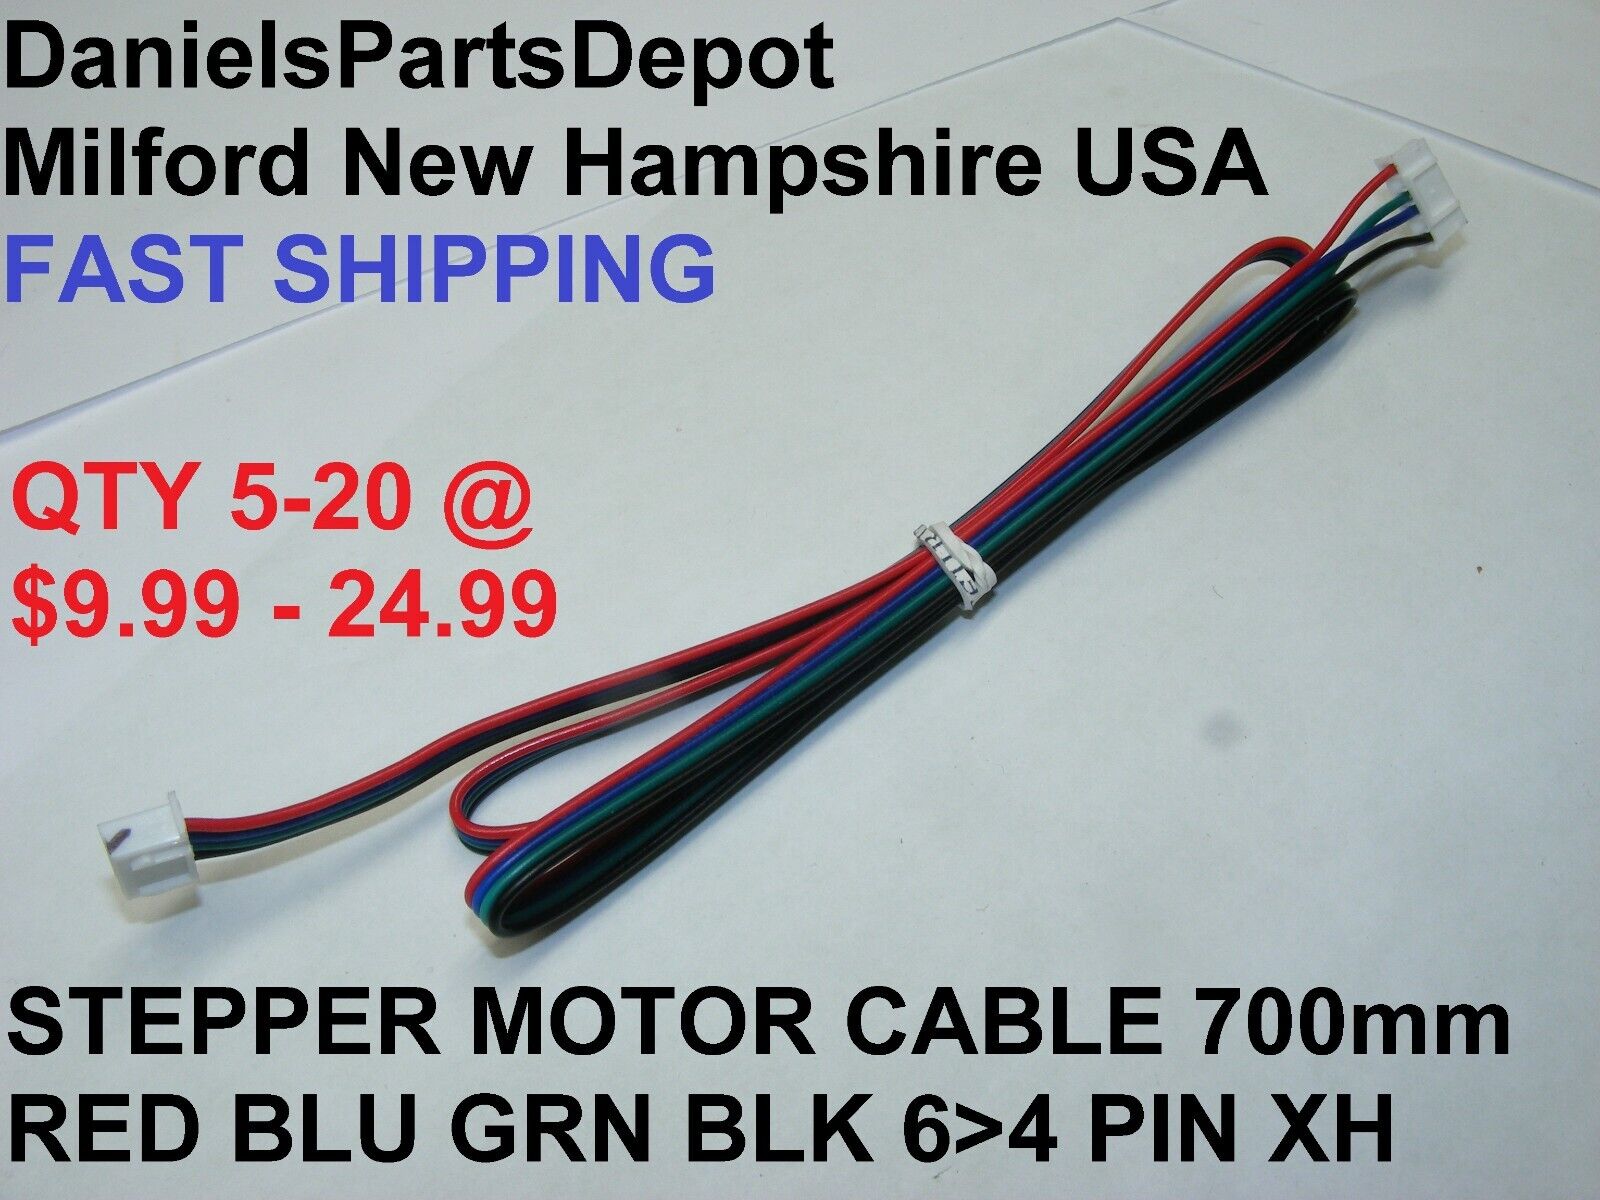 LOT 5-20 STEPPER MOTOR CABLE 700mm RED BLU GRN BLK 6 PIN2.0 4 PIN XH2.54 USA 3D